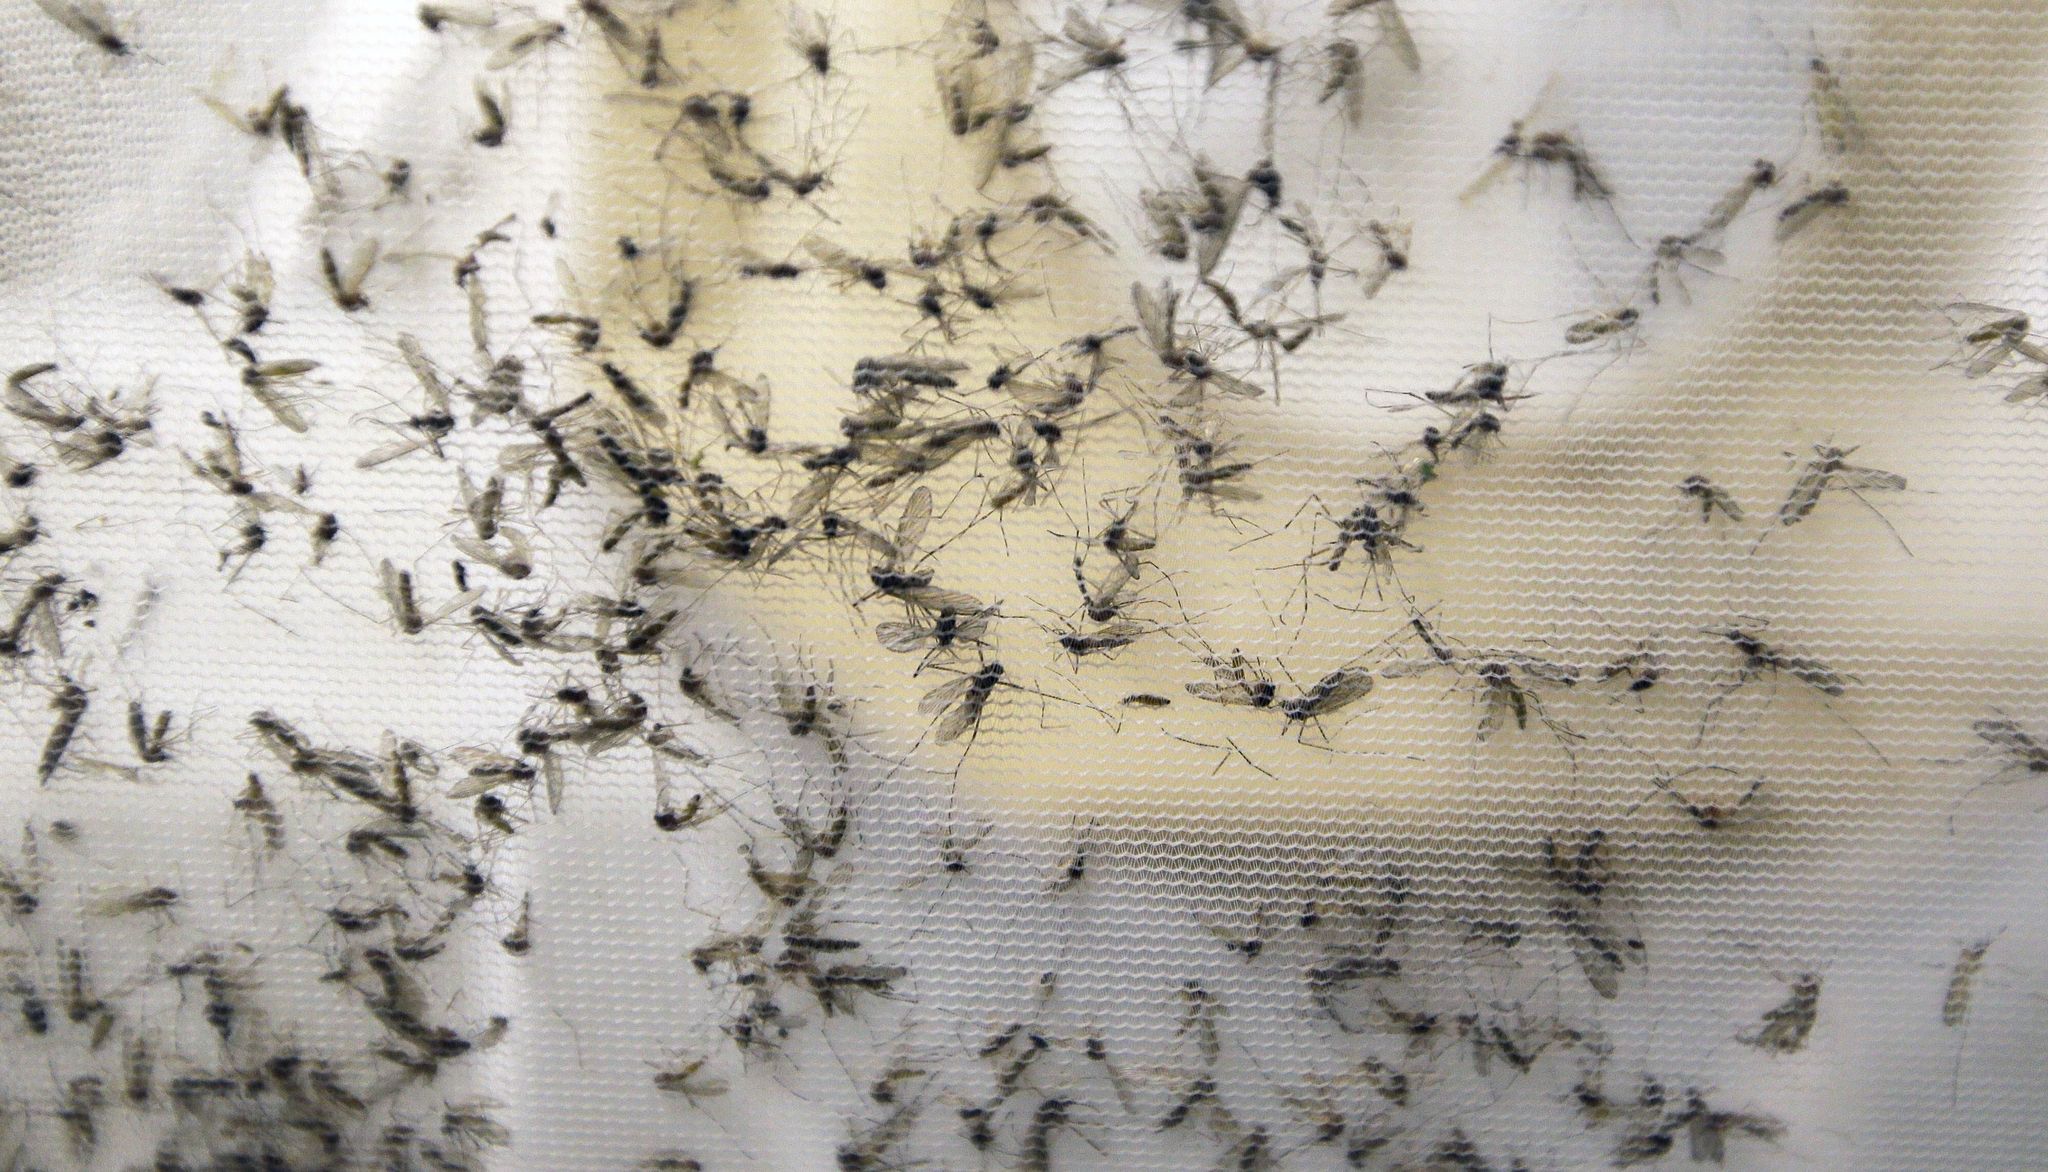 A trap holds mosquitos at the Dallas County Mosquito Lab in Hutchins, Texas, in February. The trap had been set up near the location of a confirmed Zika virus infection.